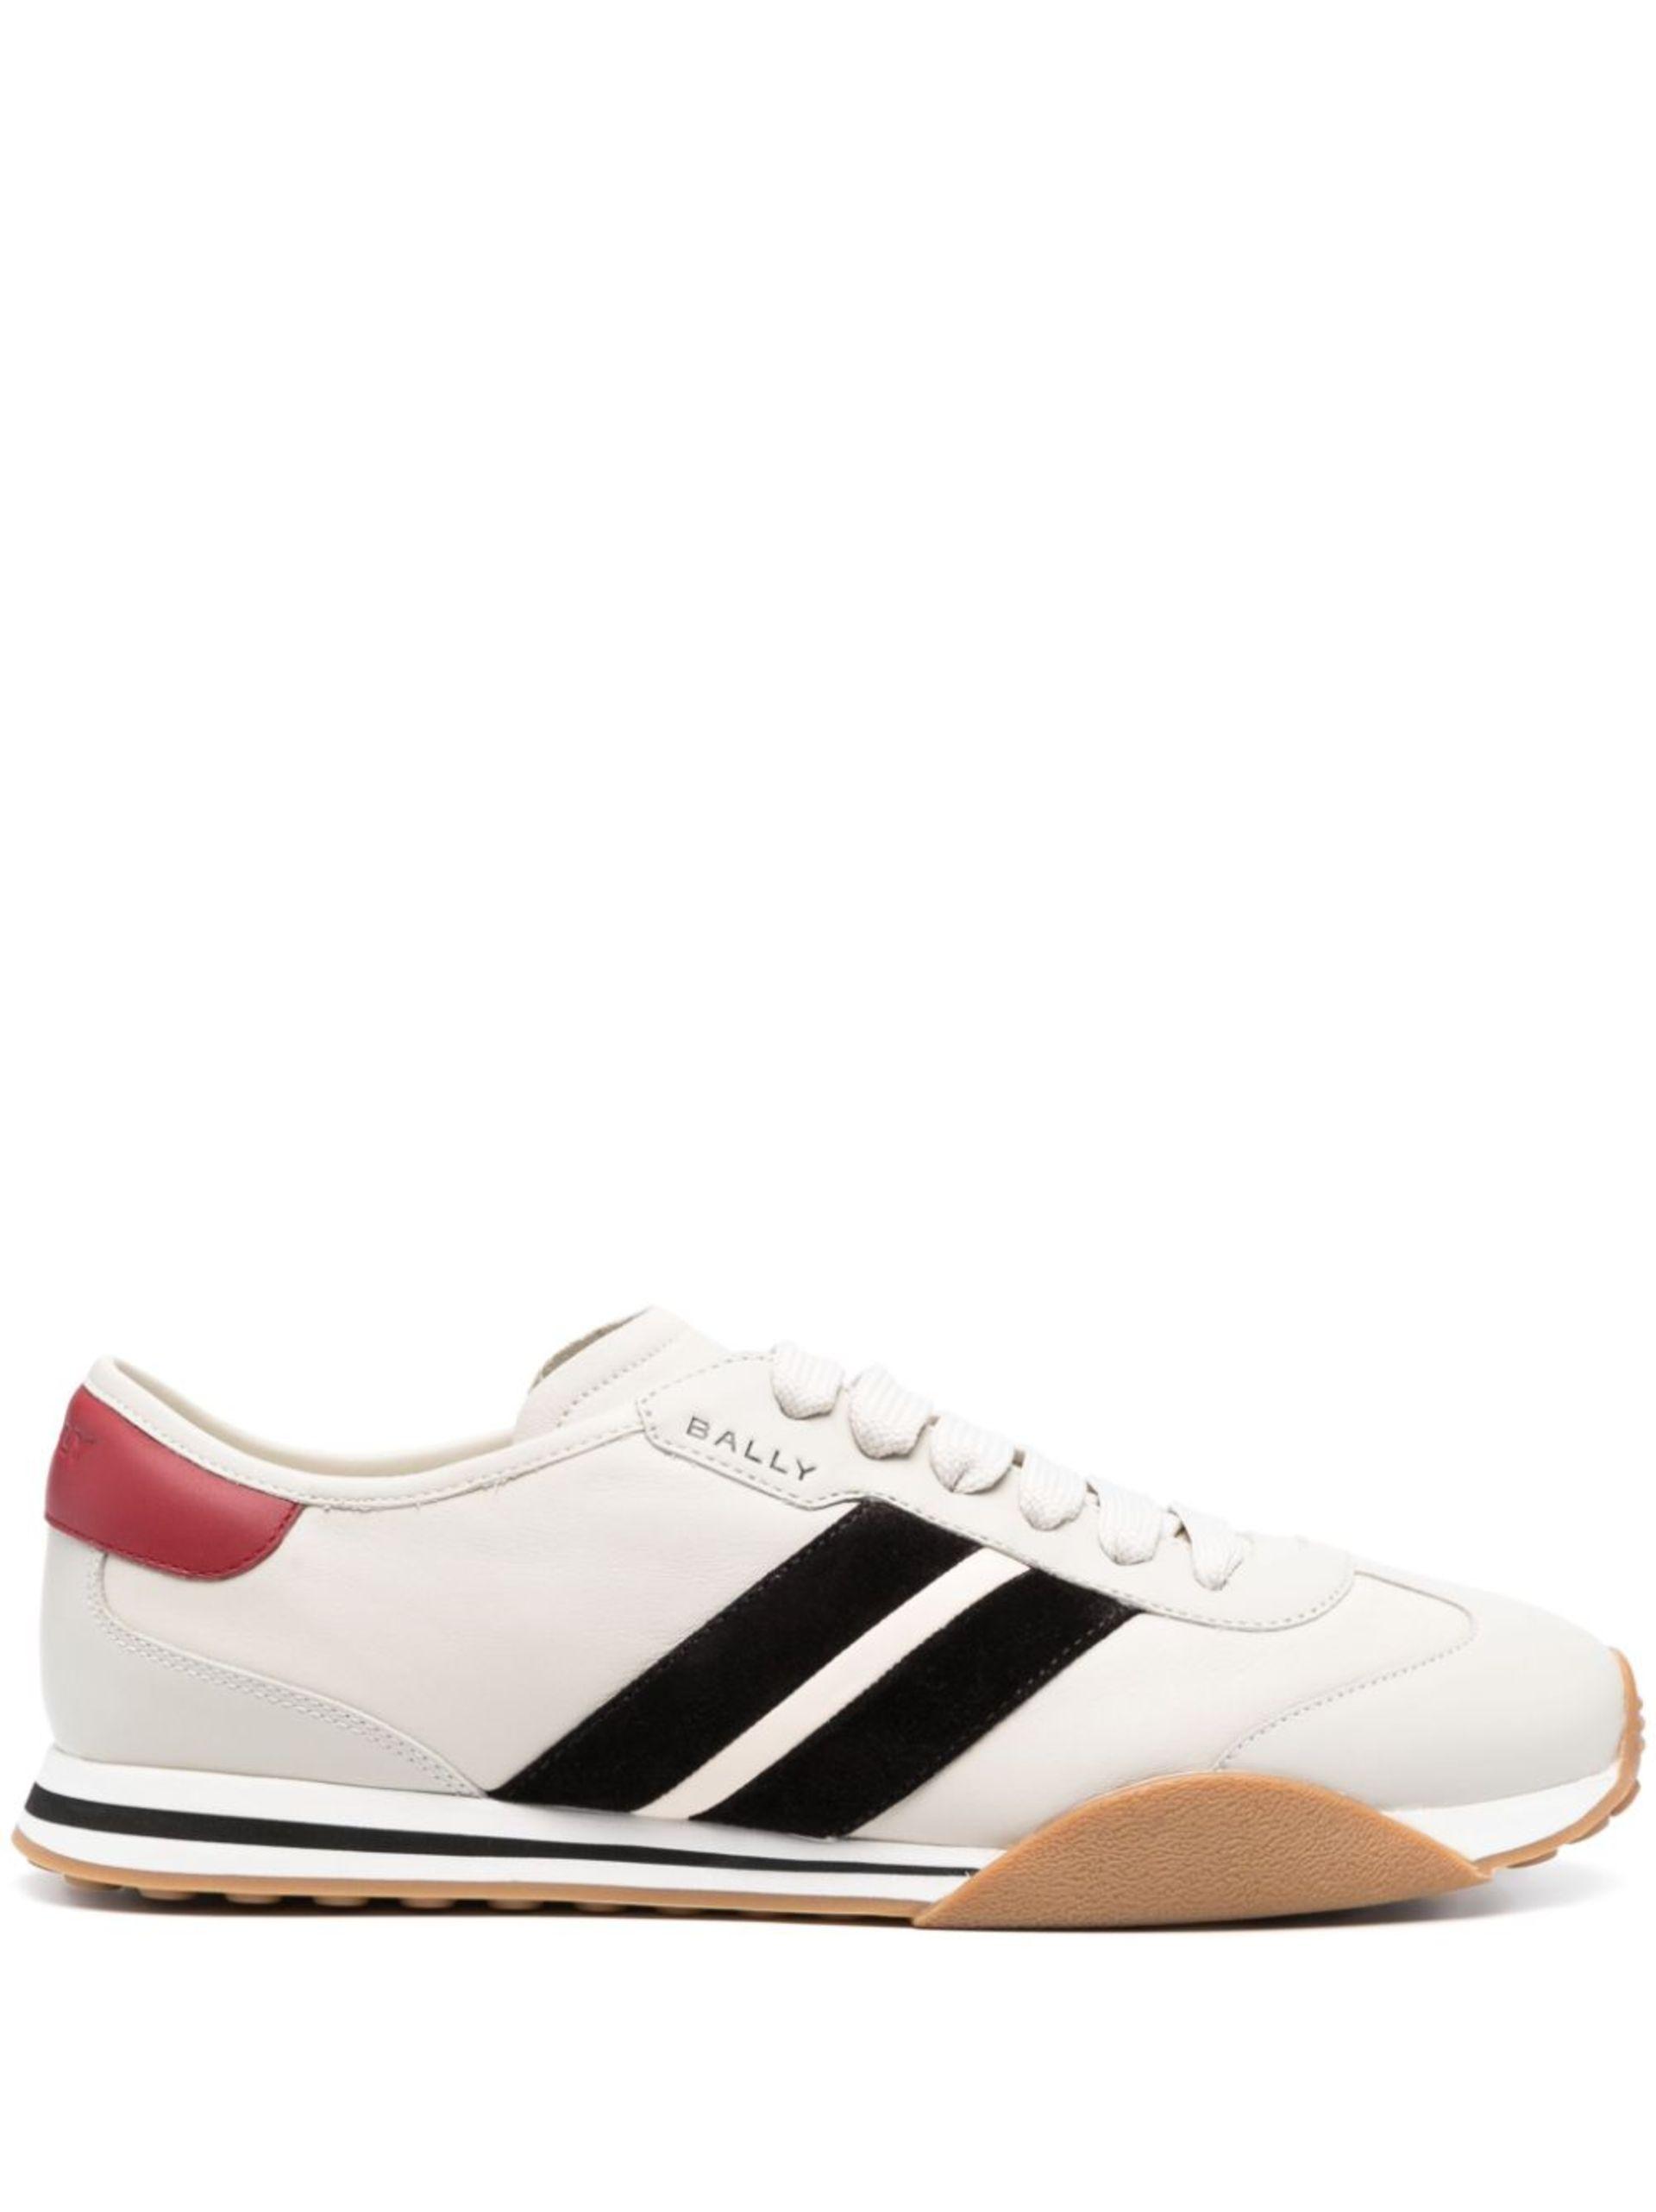 Bally Low-top Leather Sneakers in White for Men | Lyst